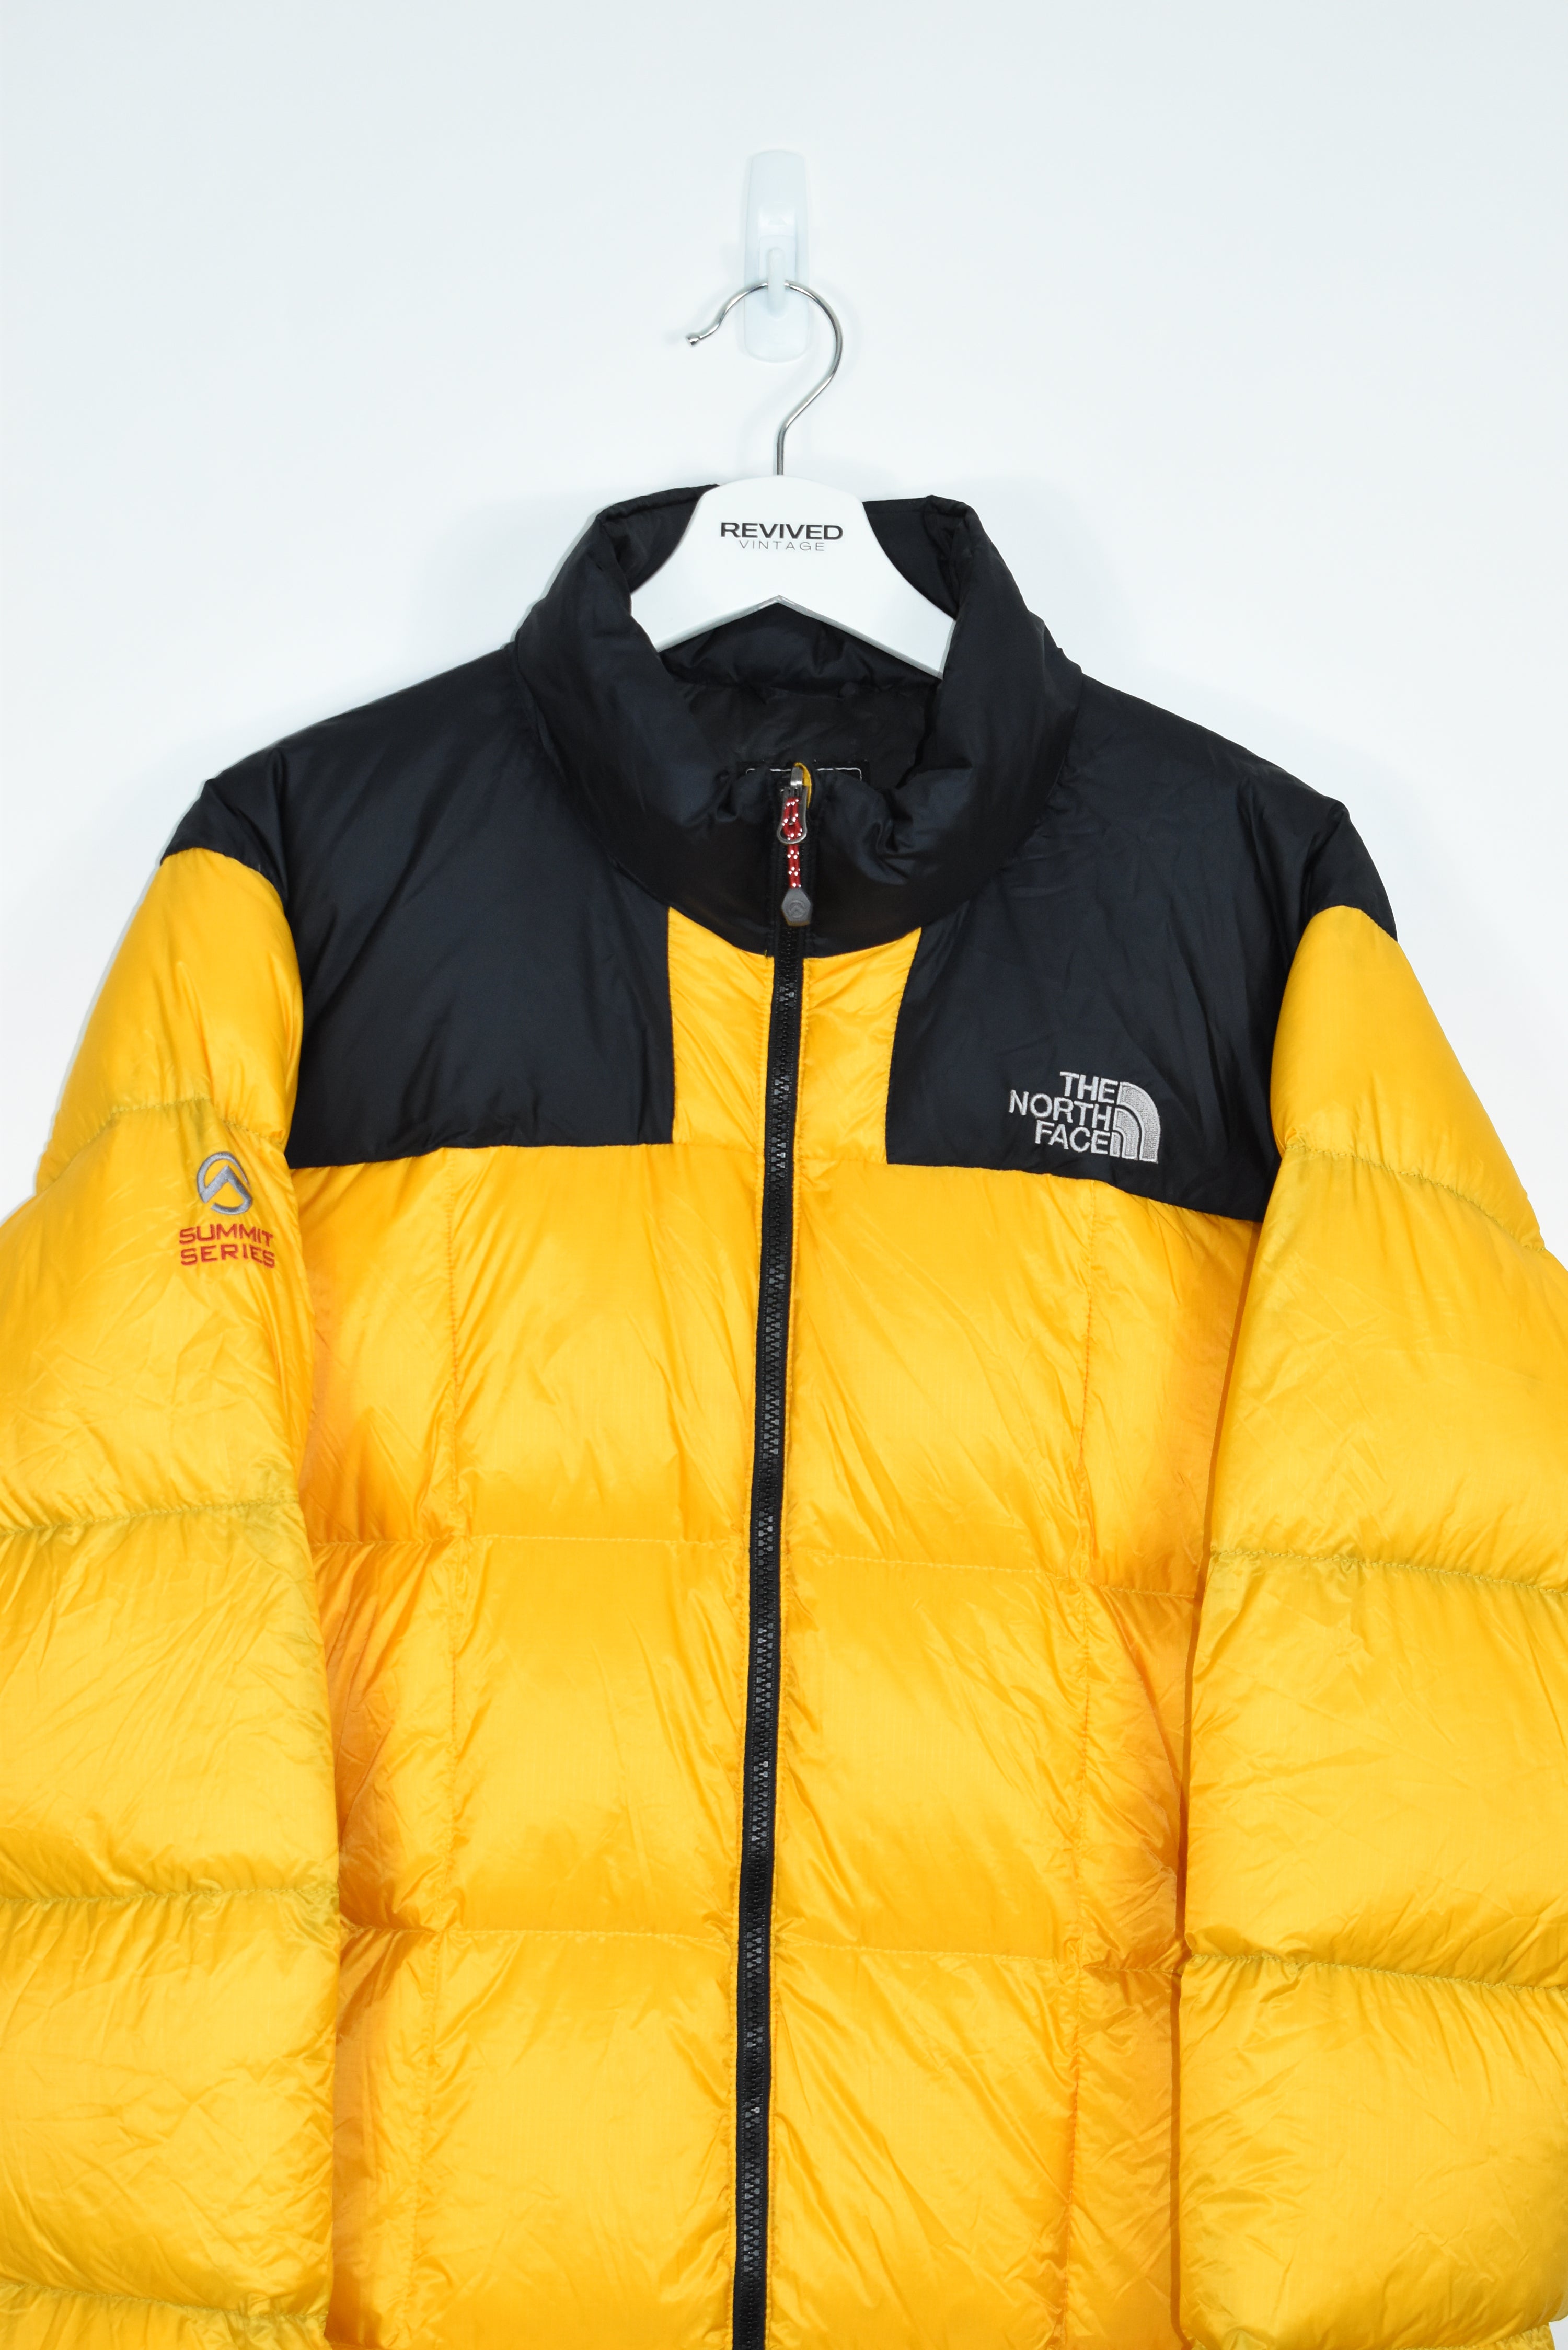 Vintage North Face Yellow Puffer 800 Sumit Series LARGE (Baggy)